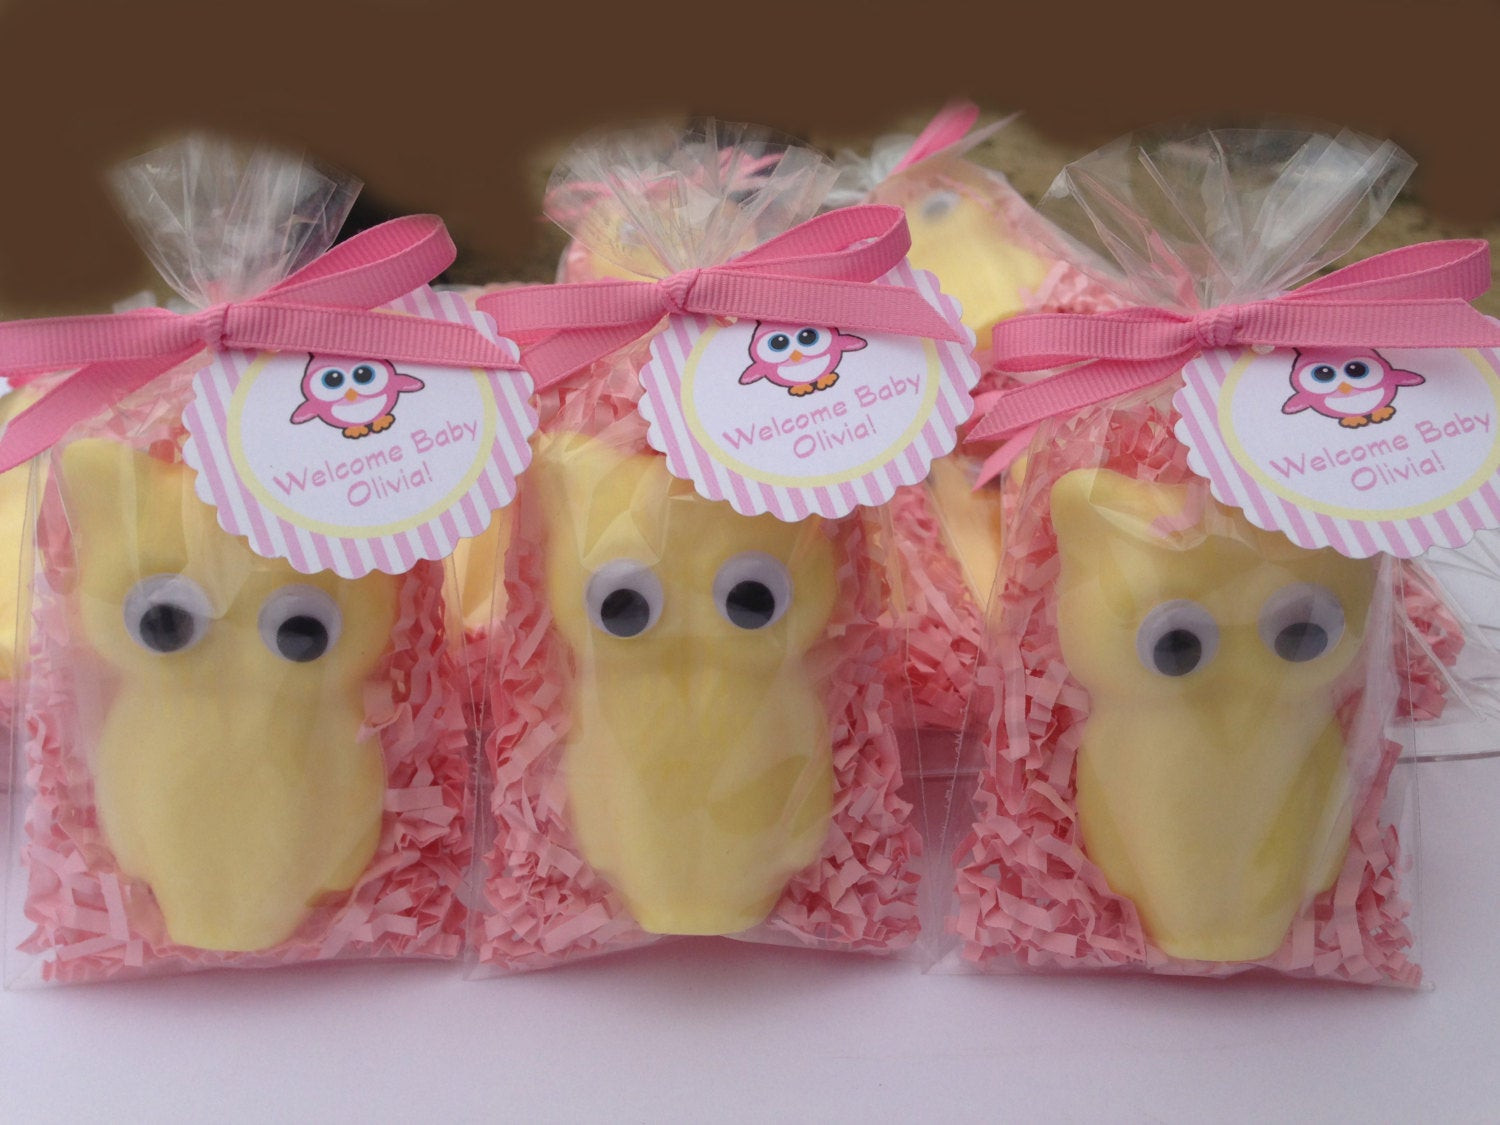 Owl Party Favors For Baby Shower
 Owls soaps Party favors Baby shower Soap owls owls by BBSoaps